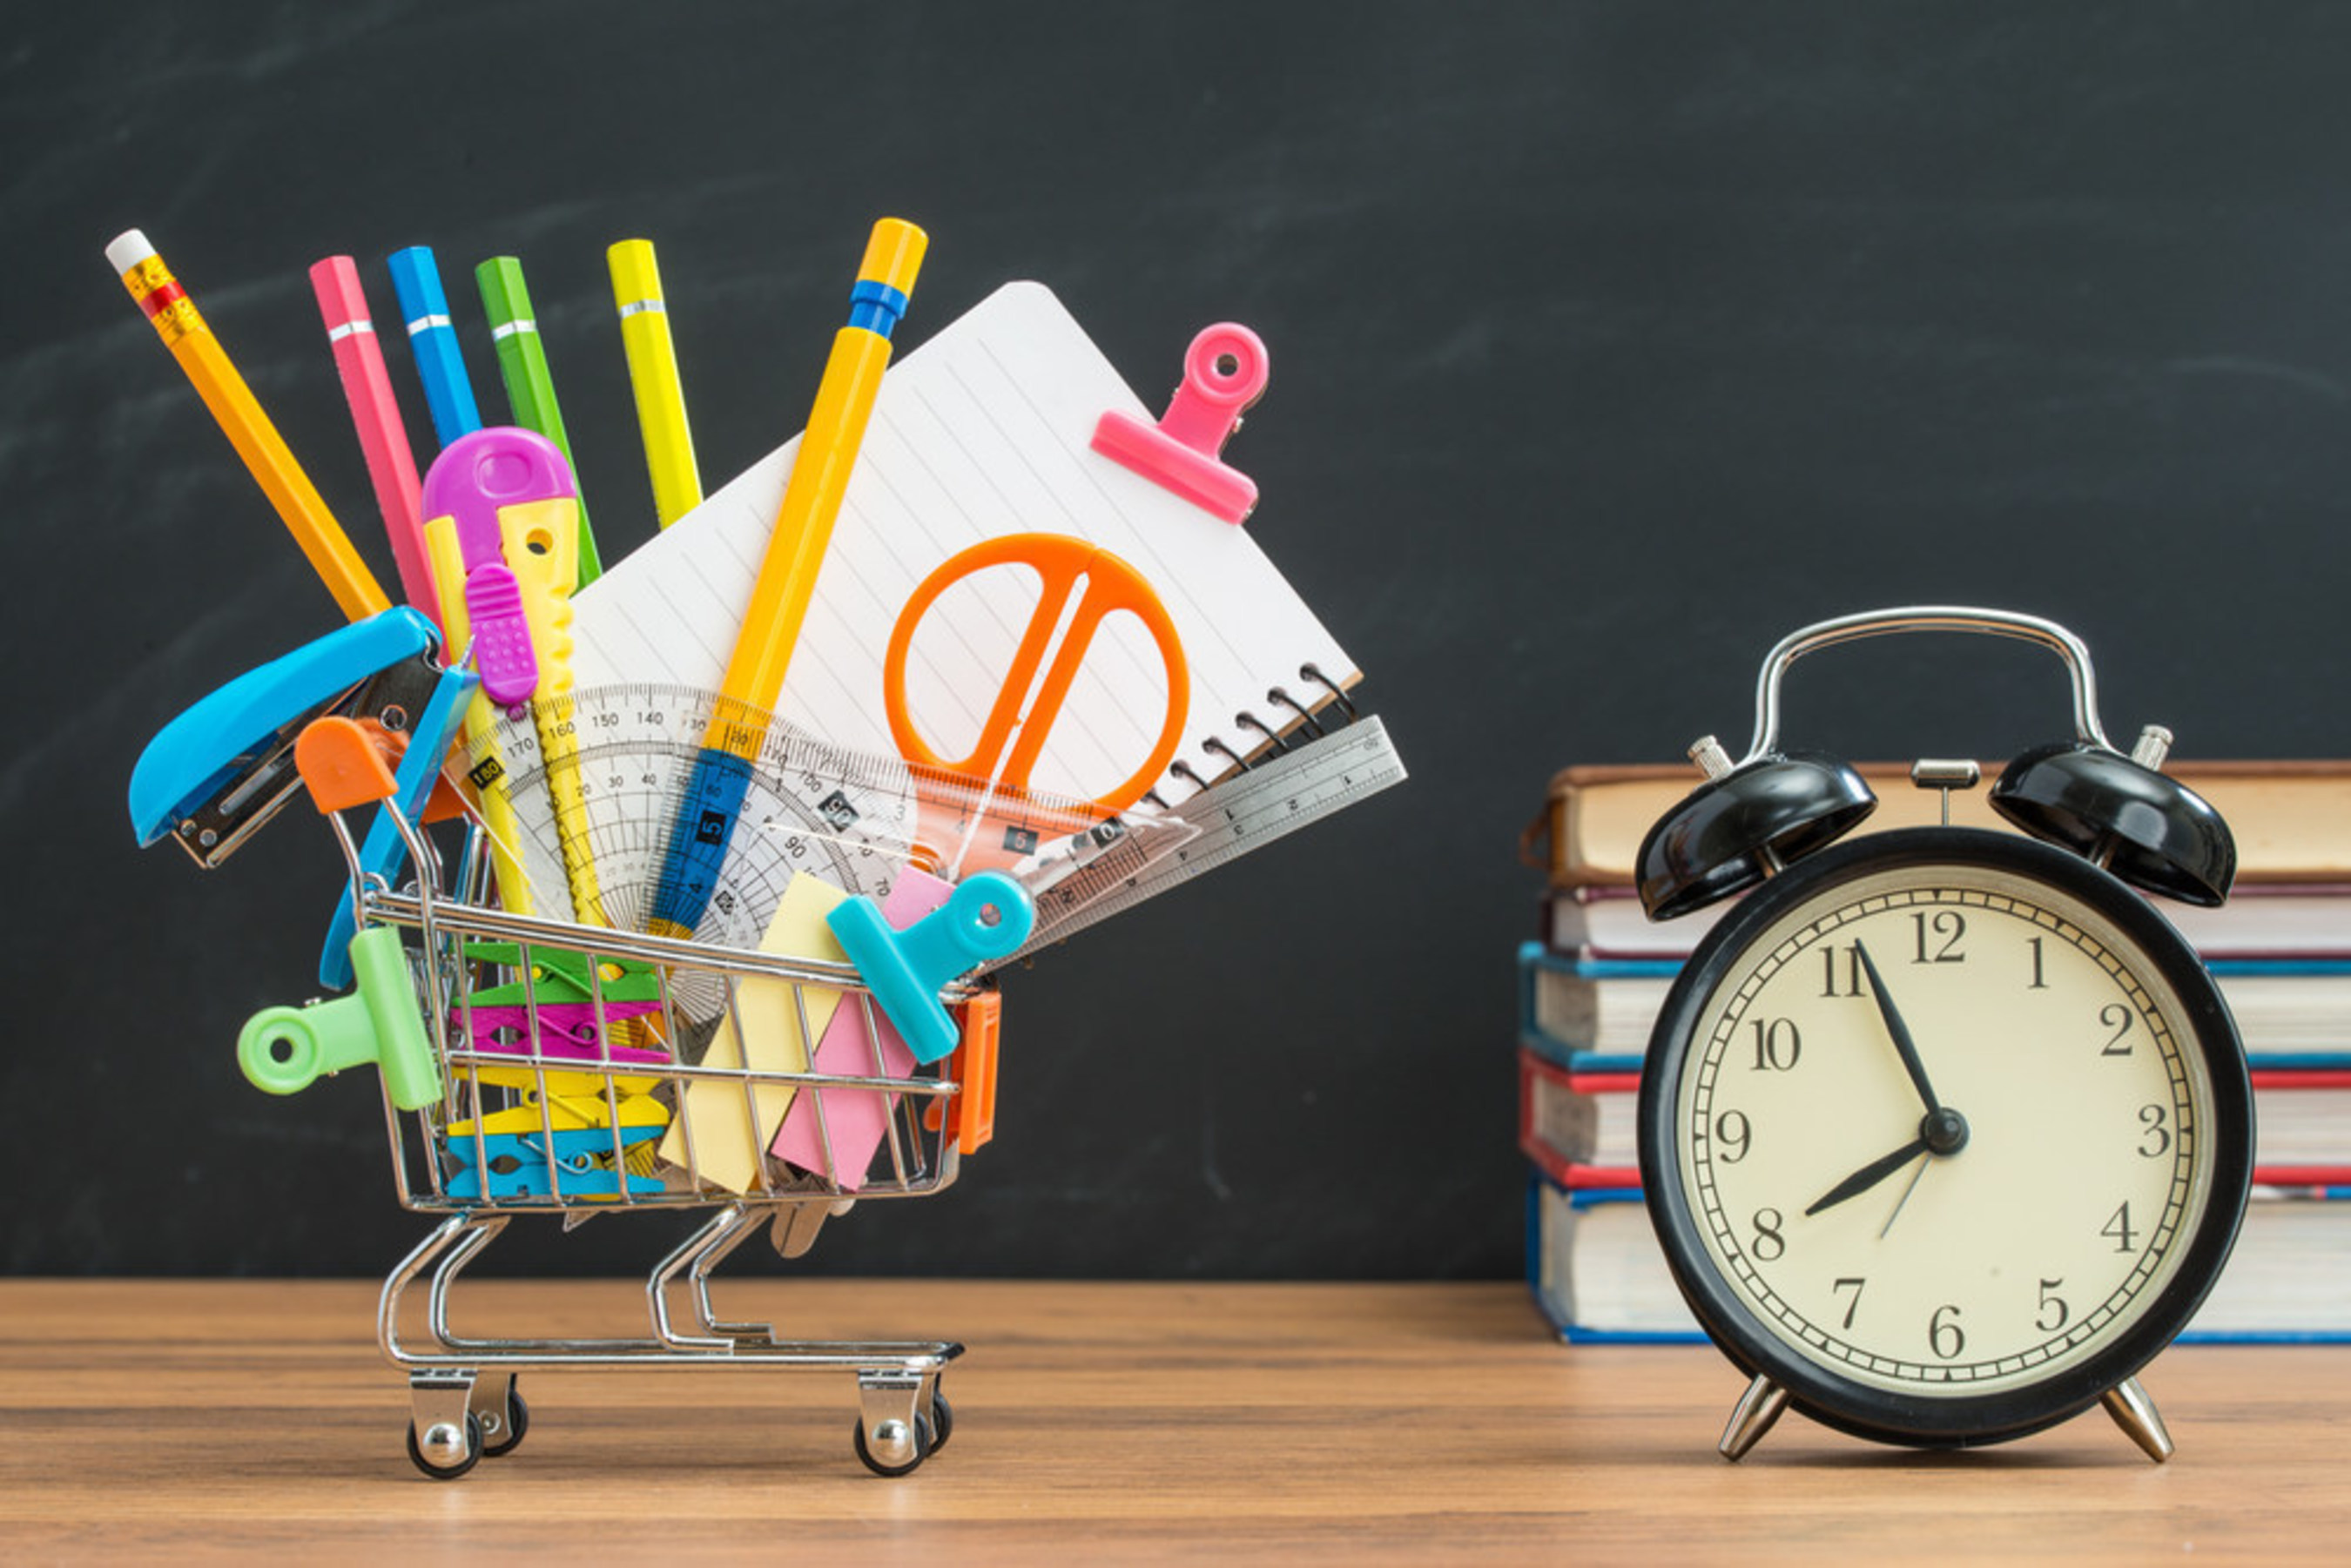 50% of consumers are still shopping for back-to-school the last half of August; while most are "window shopping" on their mobile devices, 85% still prefer to buy from a physical store.